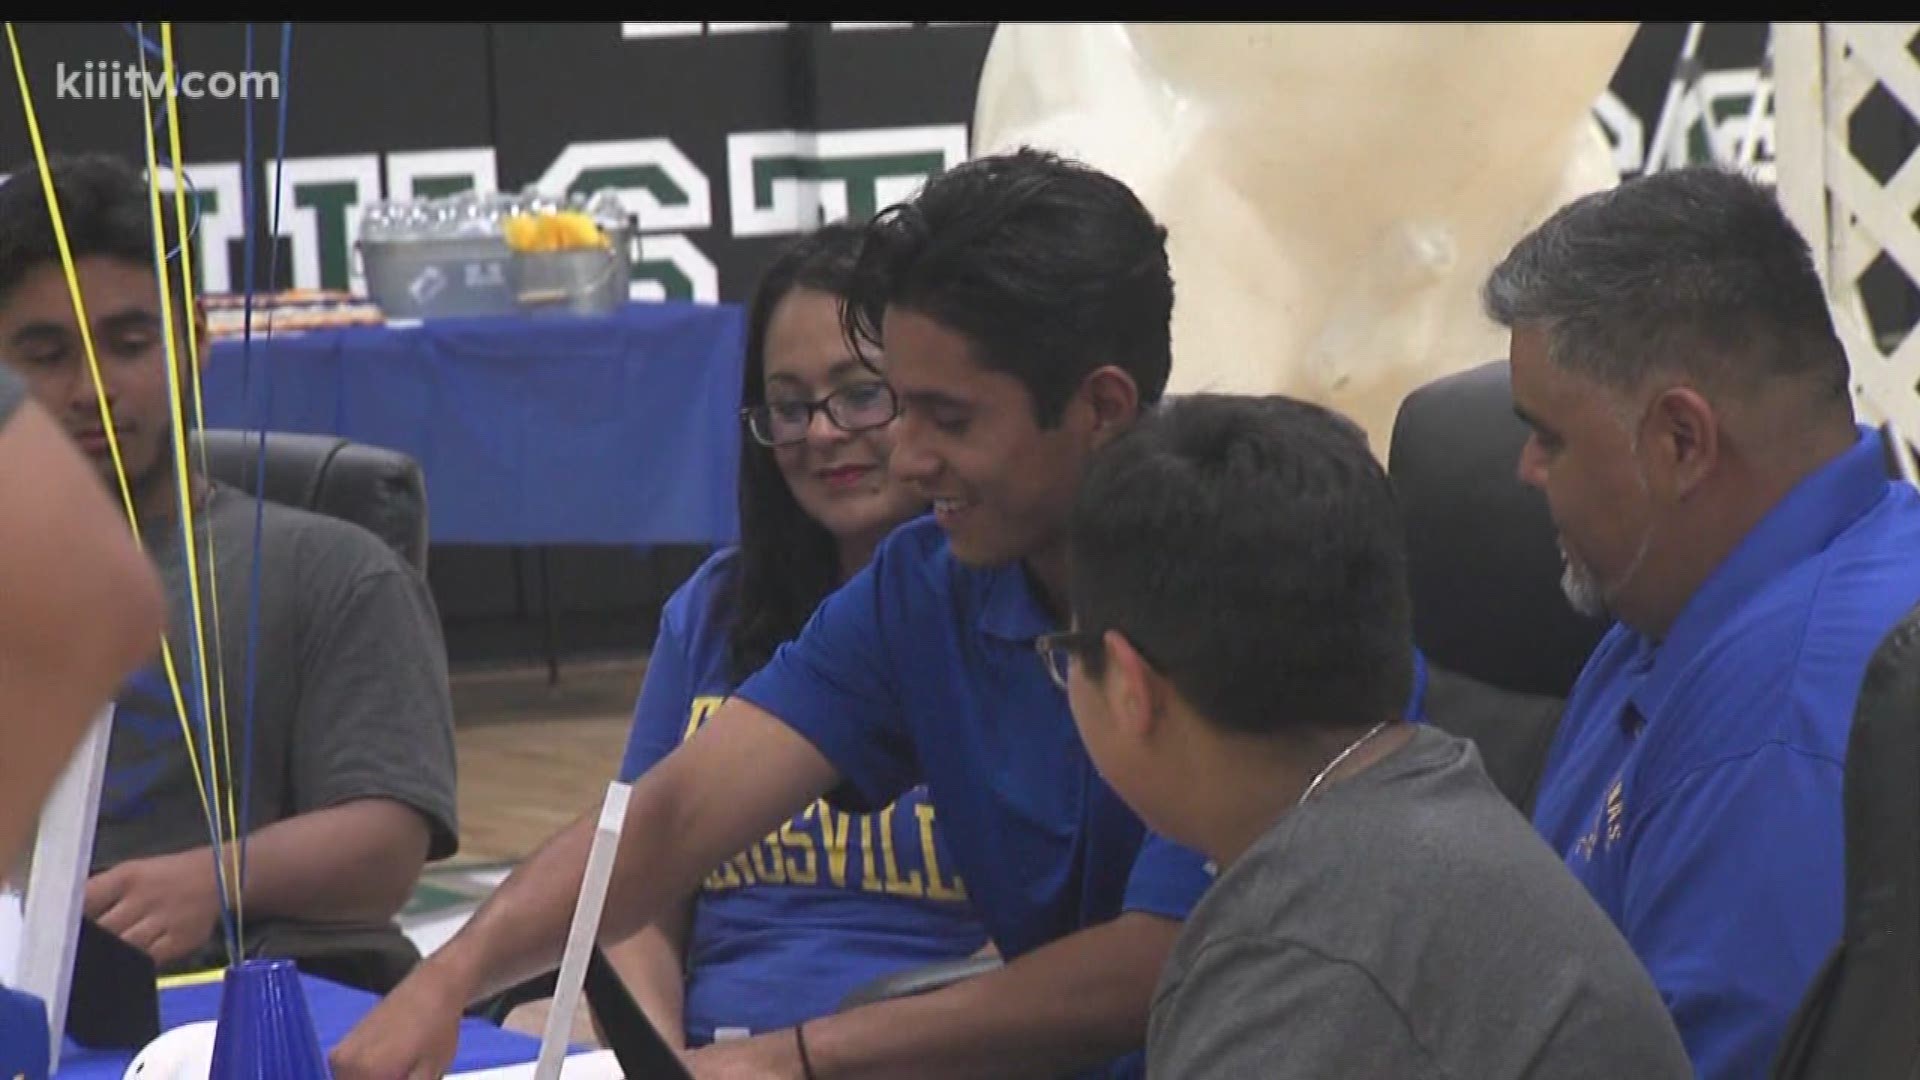 The Mustangs' baseball team took a break from playoff preparations so infielder Marco Castellanos could sign his letter of intent to play for Texas A&M-Kingsville next season.